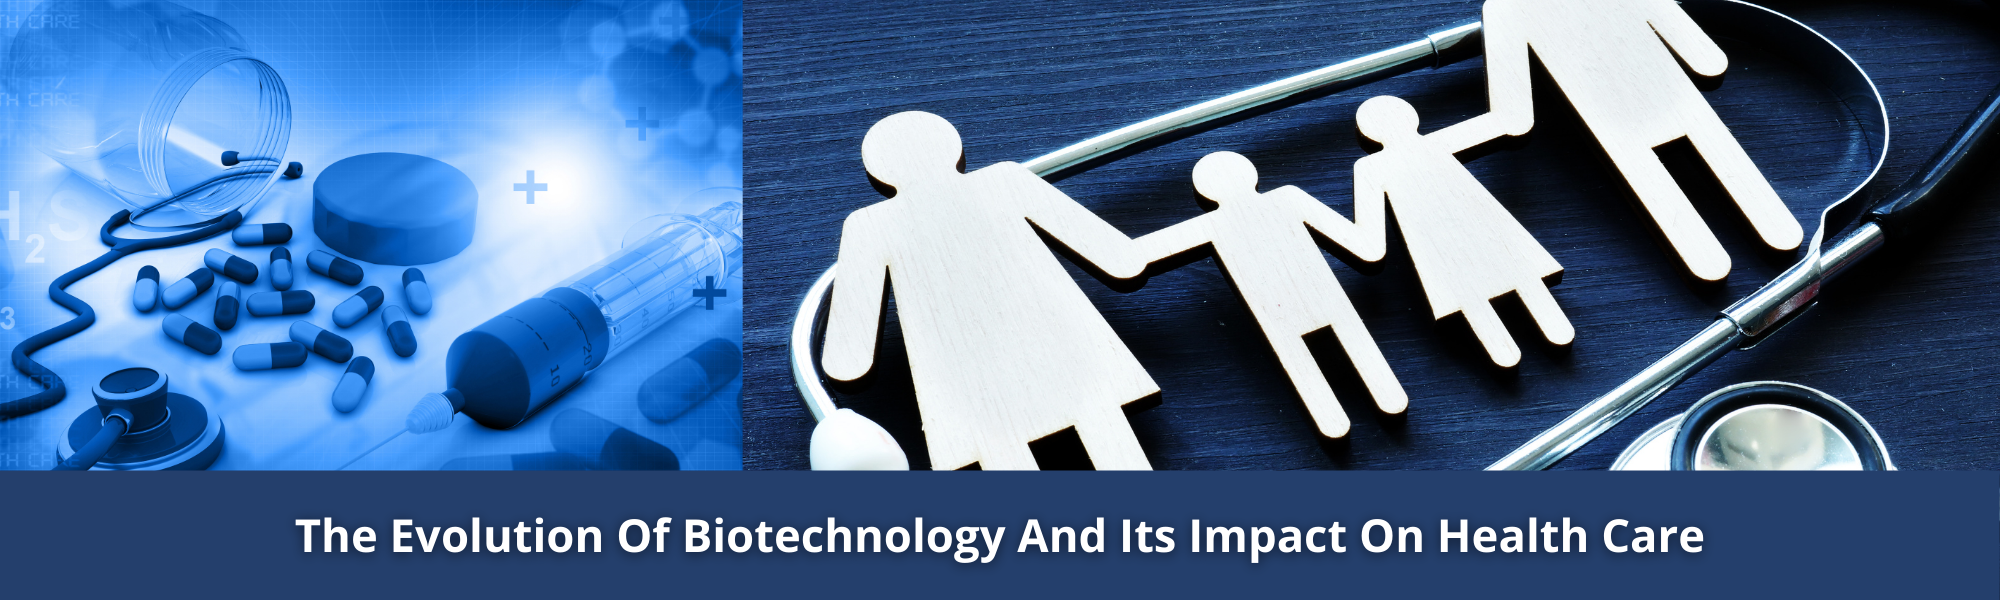 The Evolution Of Biotechnology And Its Impact On Health Care